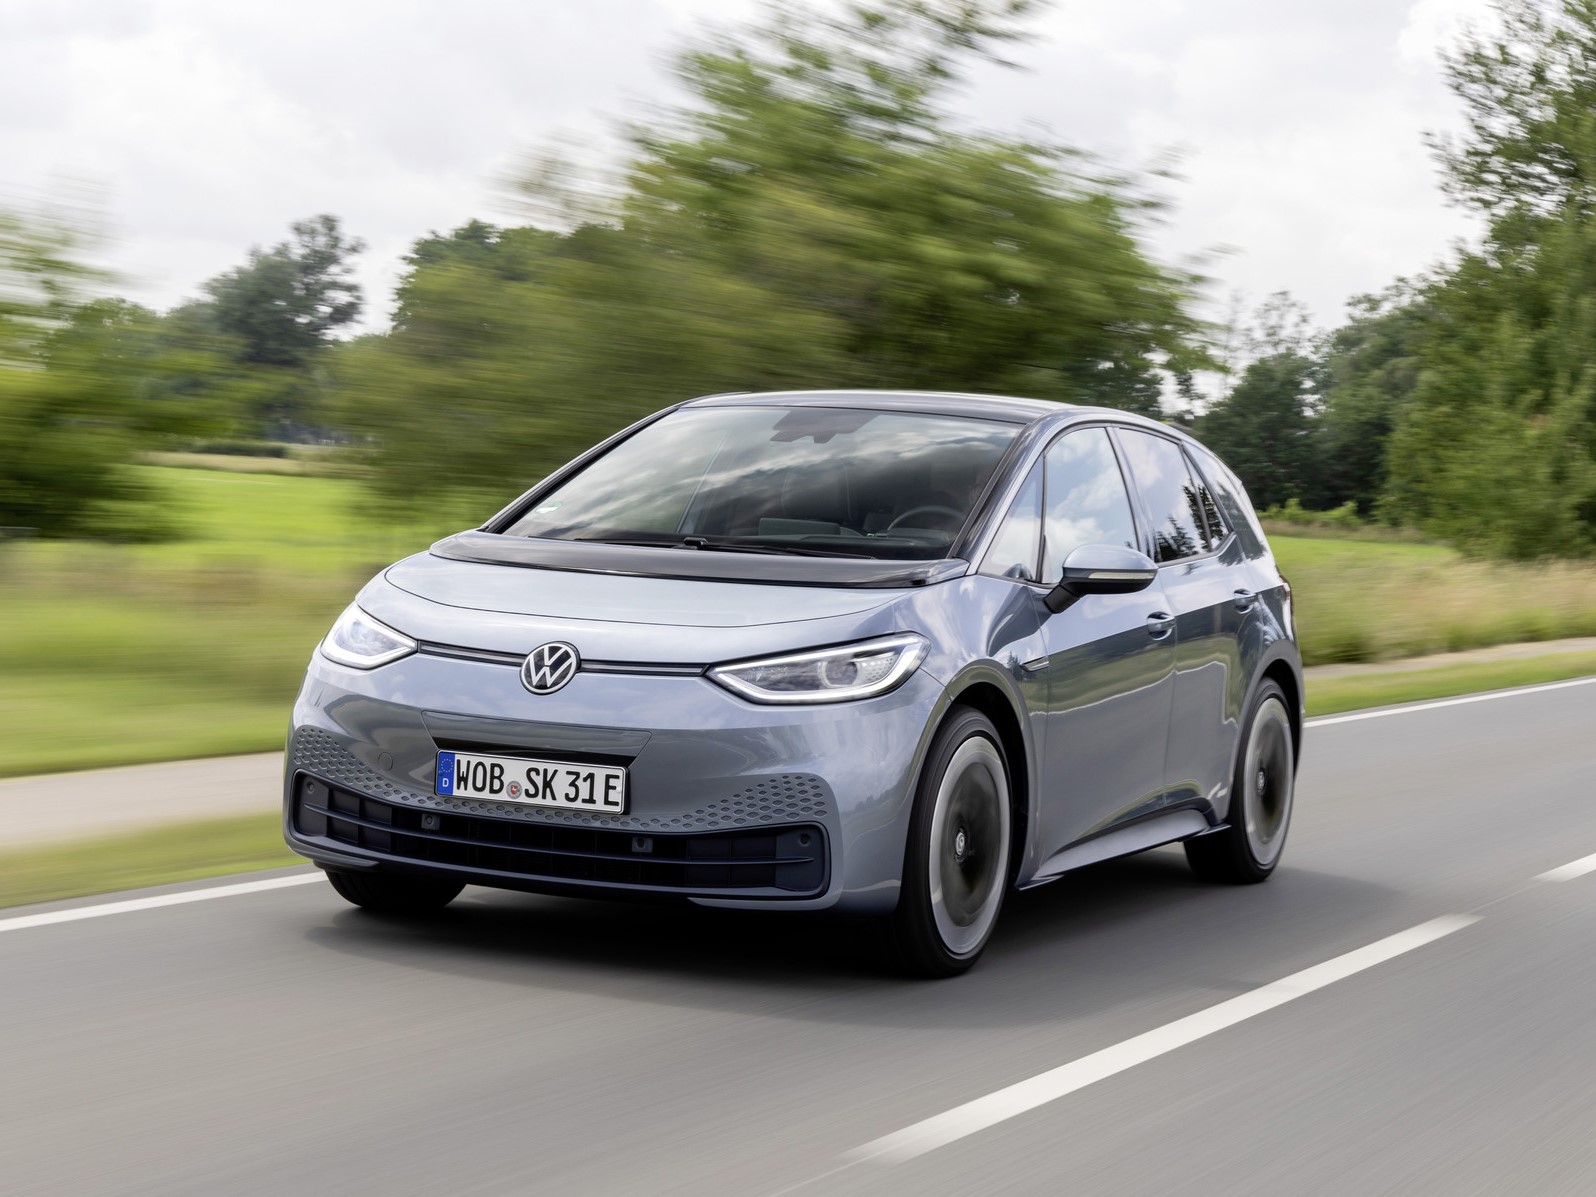 VW ID.3 battery wear better than expected in 100,000 km ADAC test